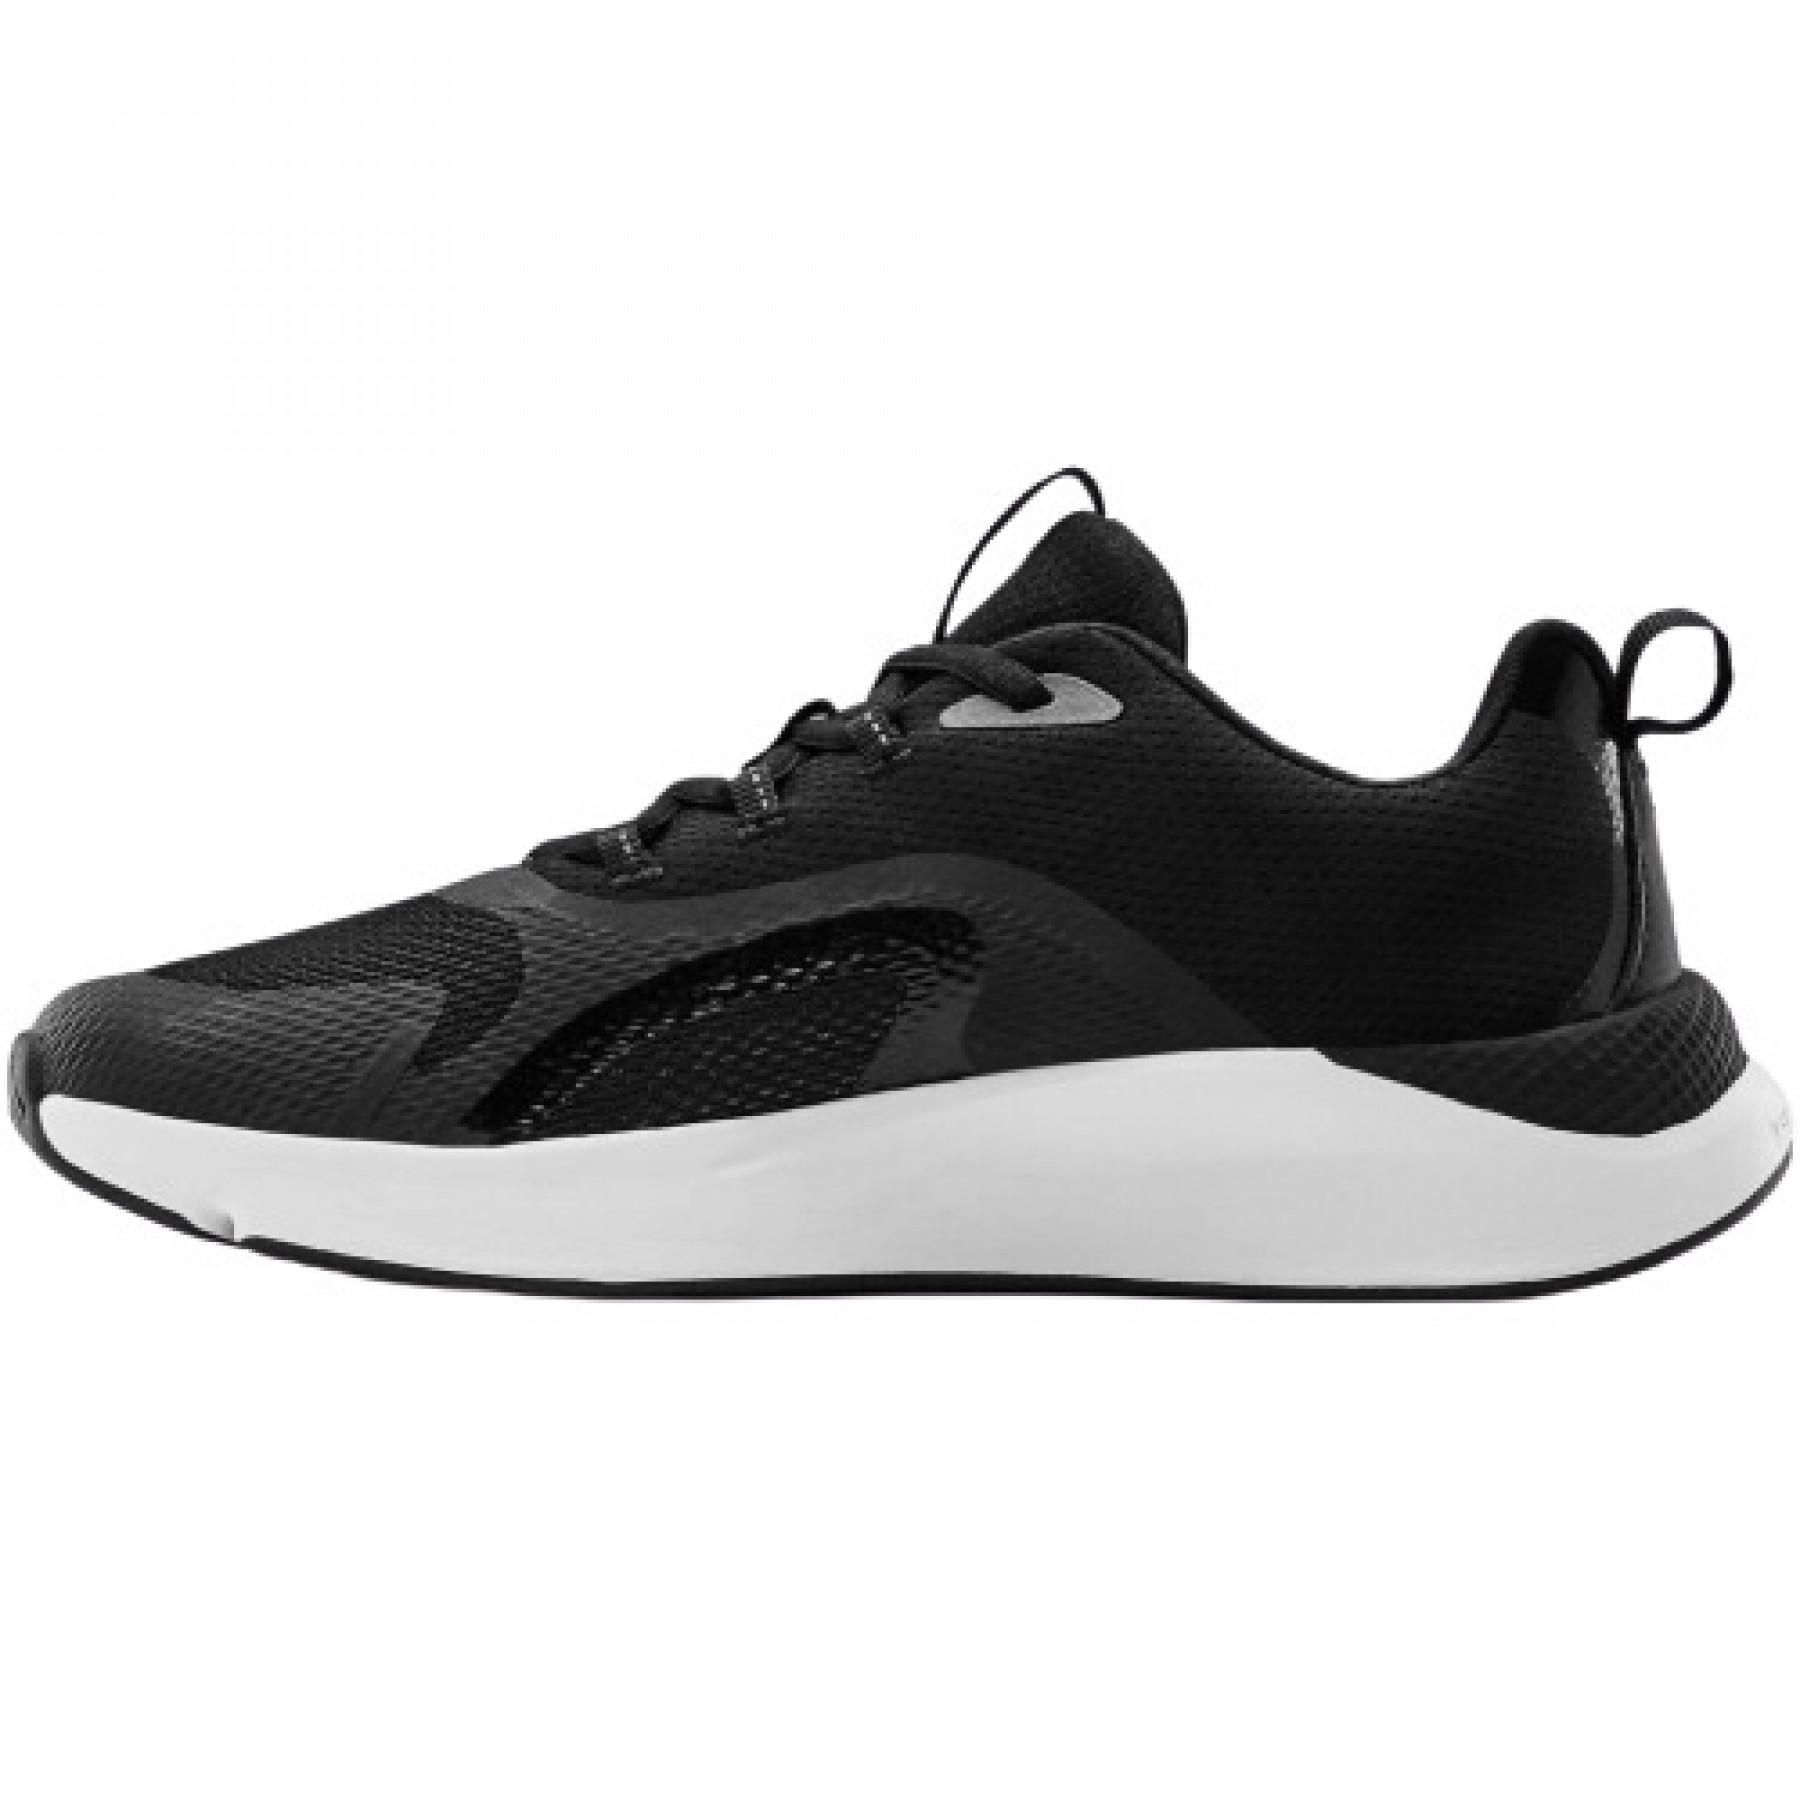 Baskets femme Under Armour Charged RC Sportstyle